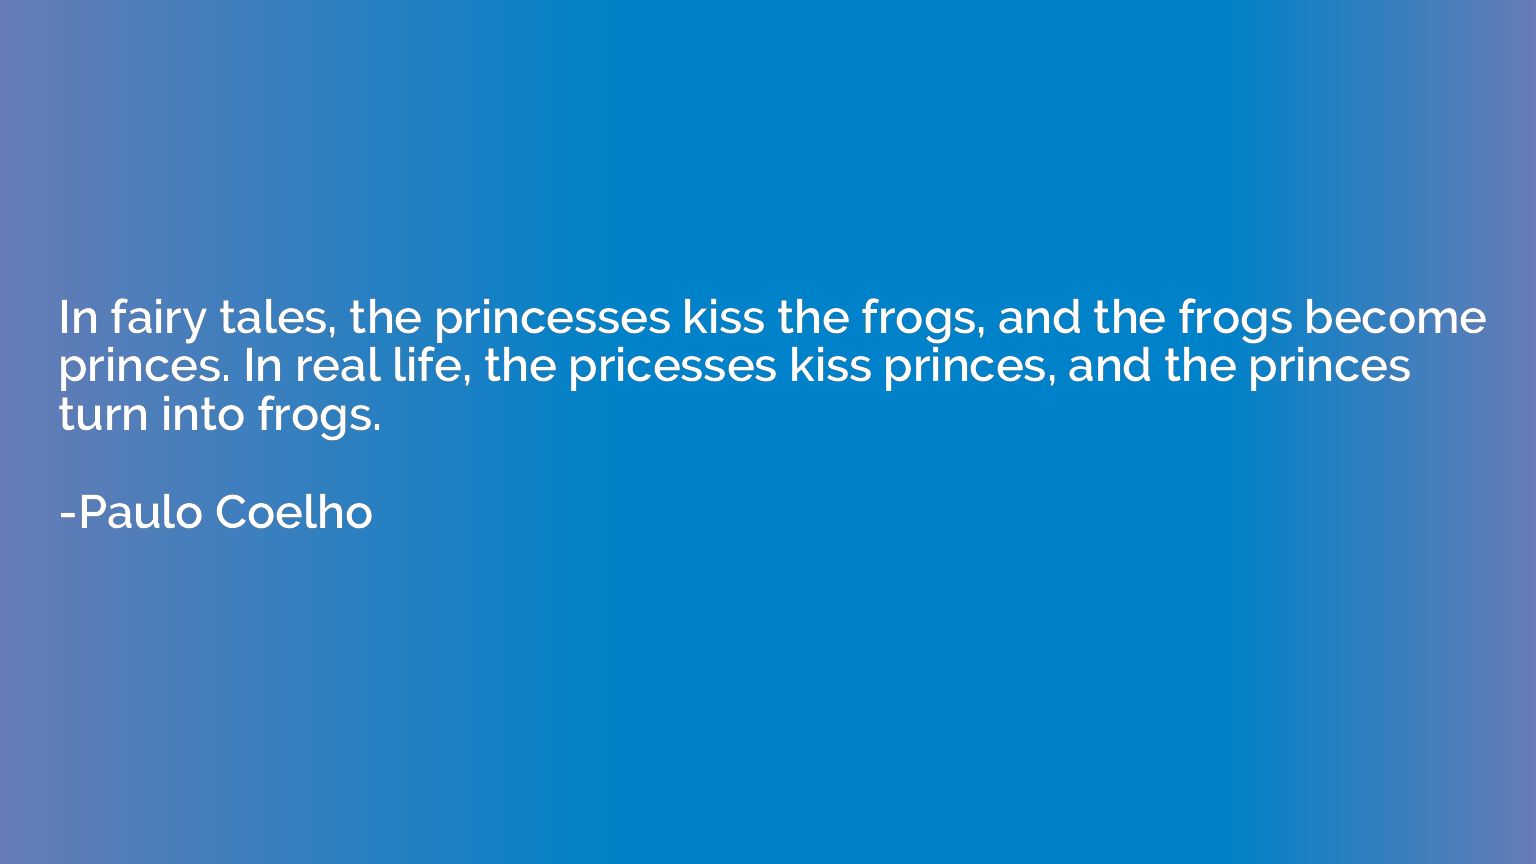 In fairy tales, the princesses kiss the frogs, and the frogs